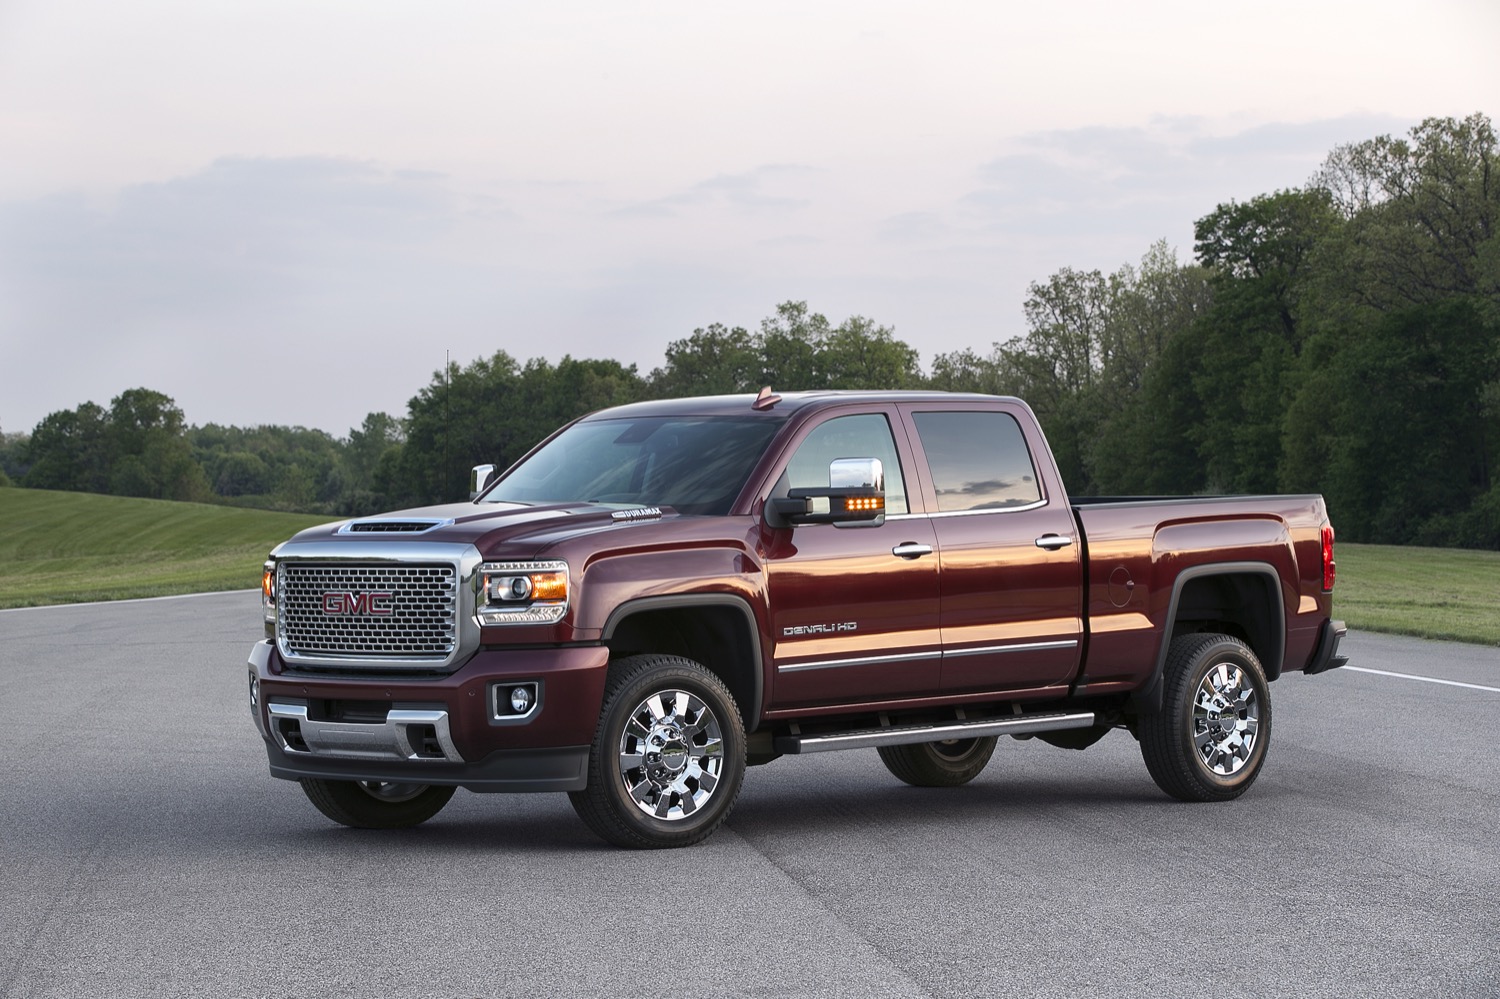 2017 Sierra Hd Gets New Diesel Engine New Colors And More